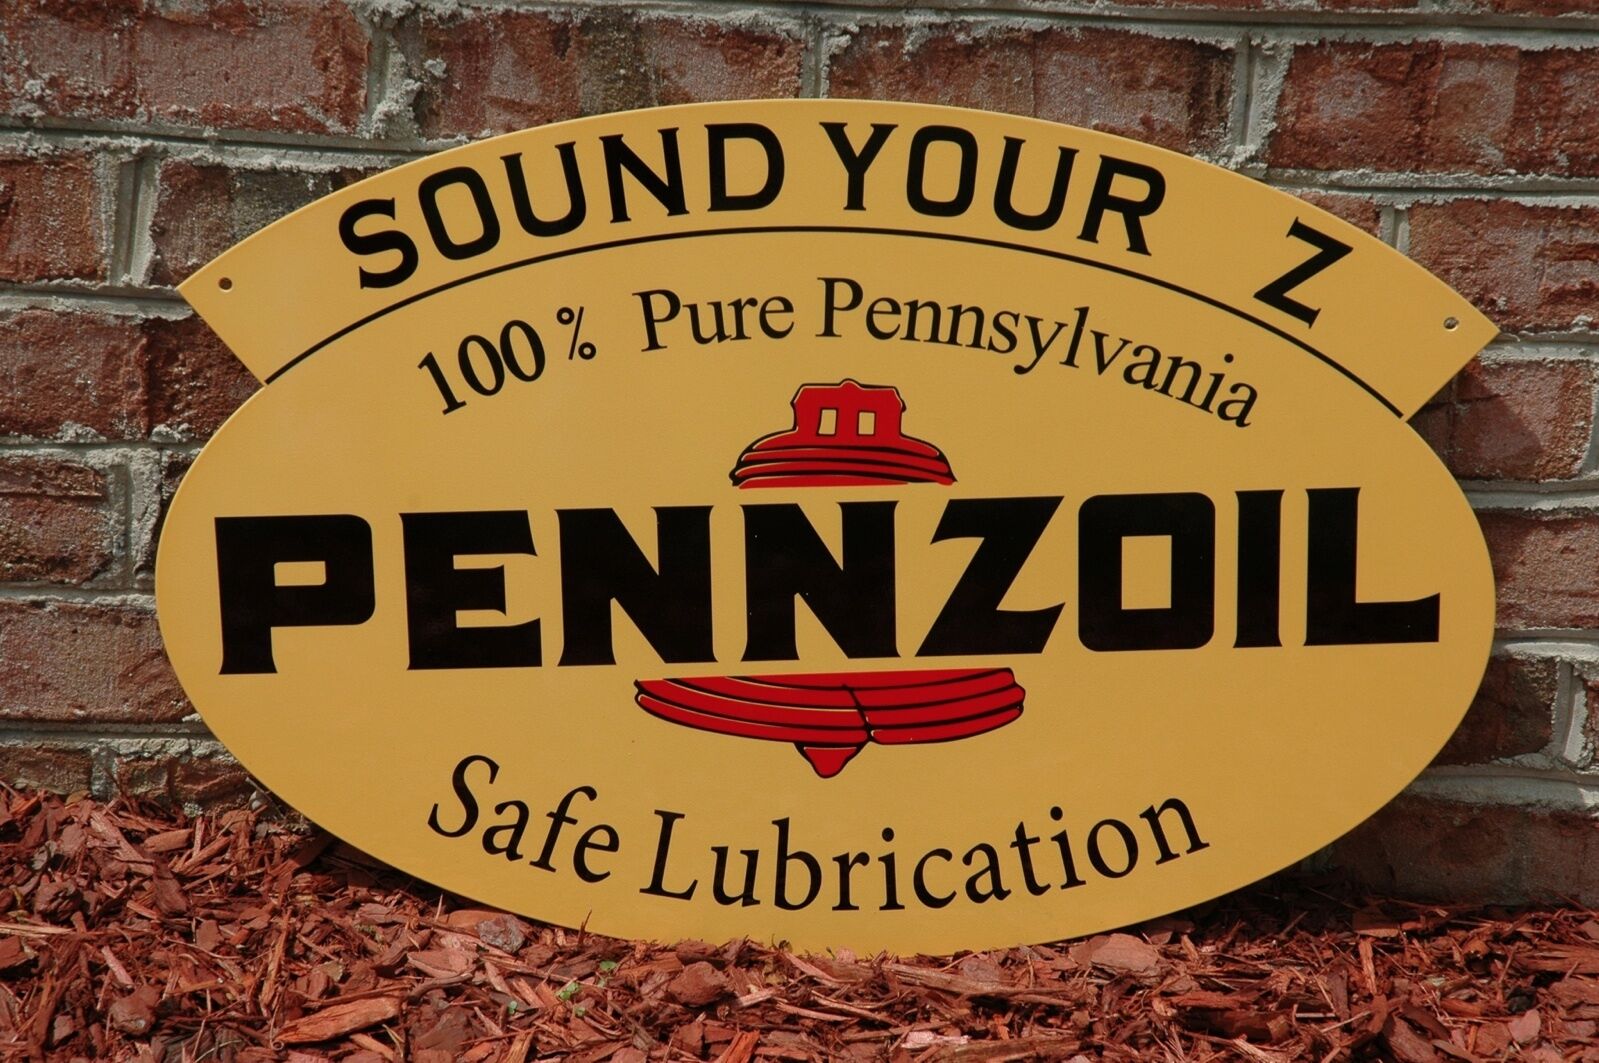 OLD STYLE PENNZOIL "SOUND YOUR Z" MOTOR OIL TWO-SIDED SWINGER SIGN MADE IN USA! Без бренда - фотография #2